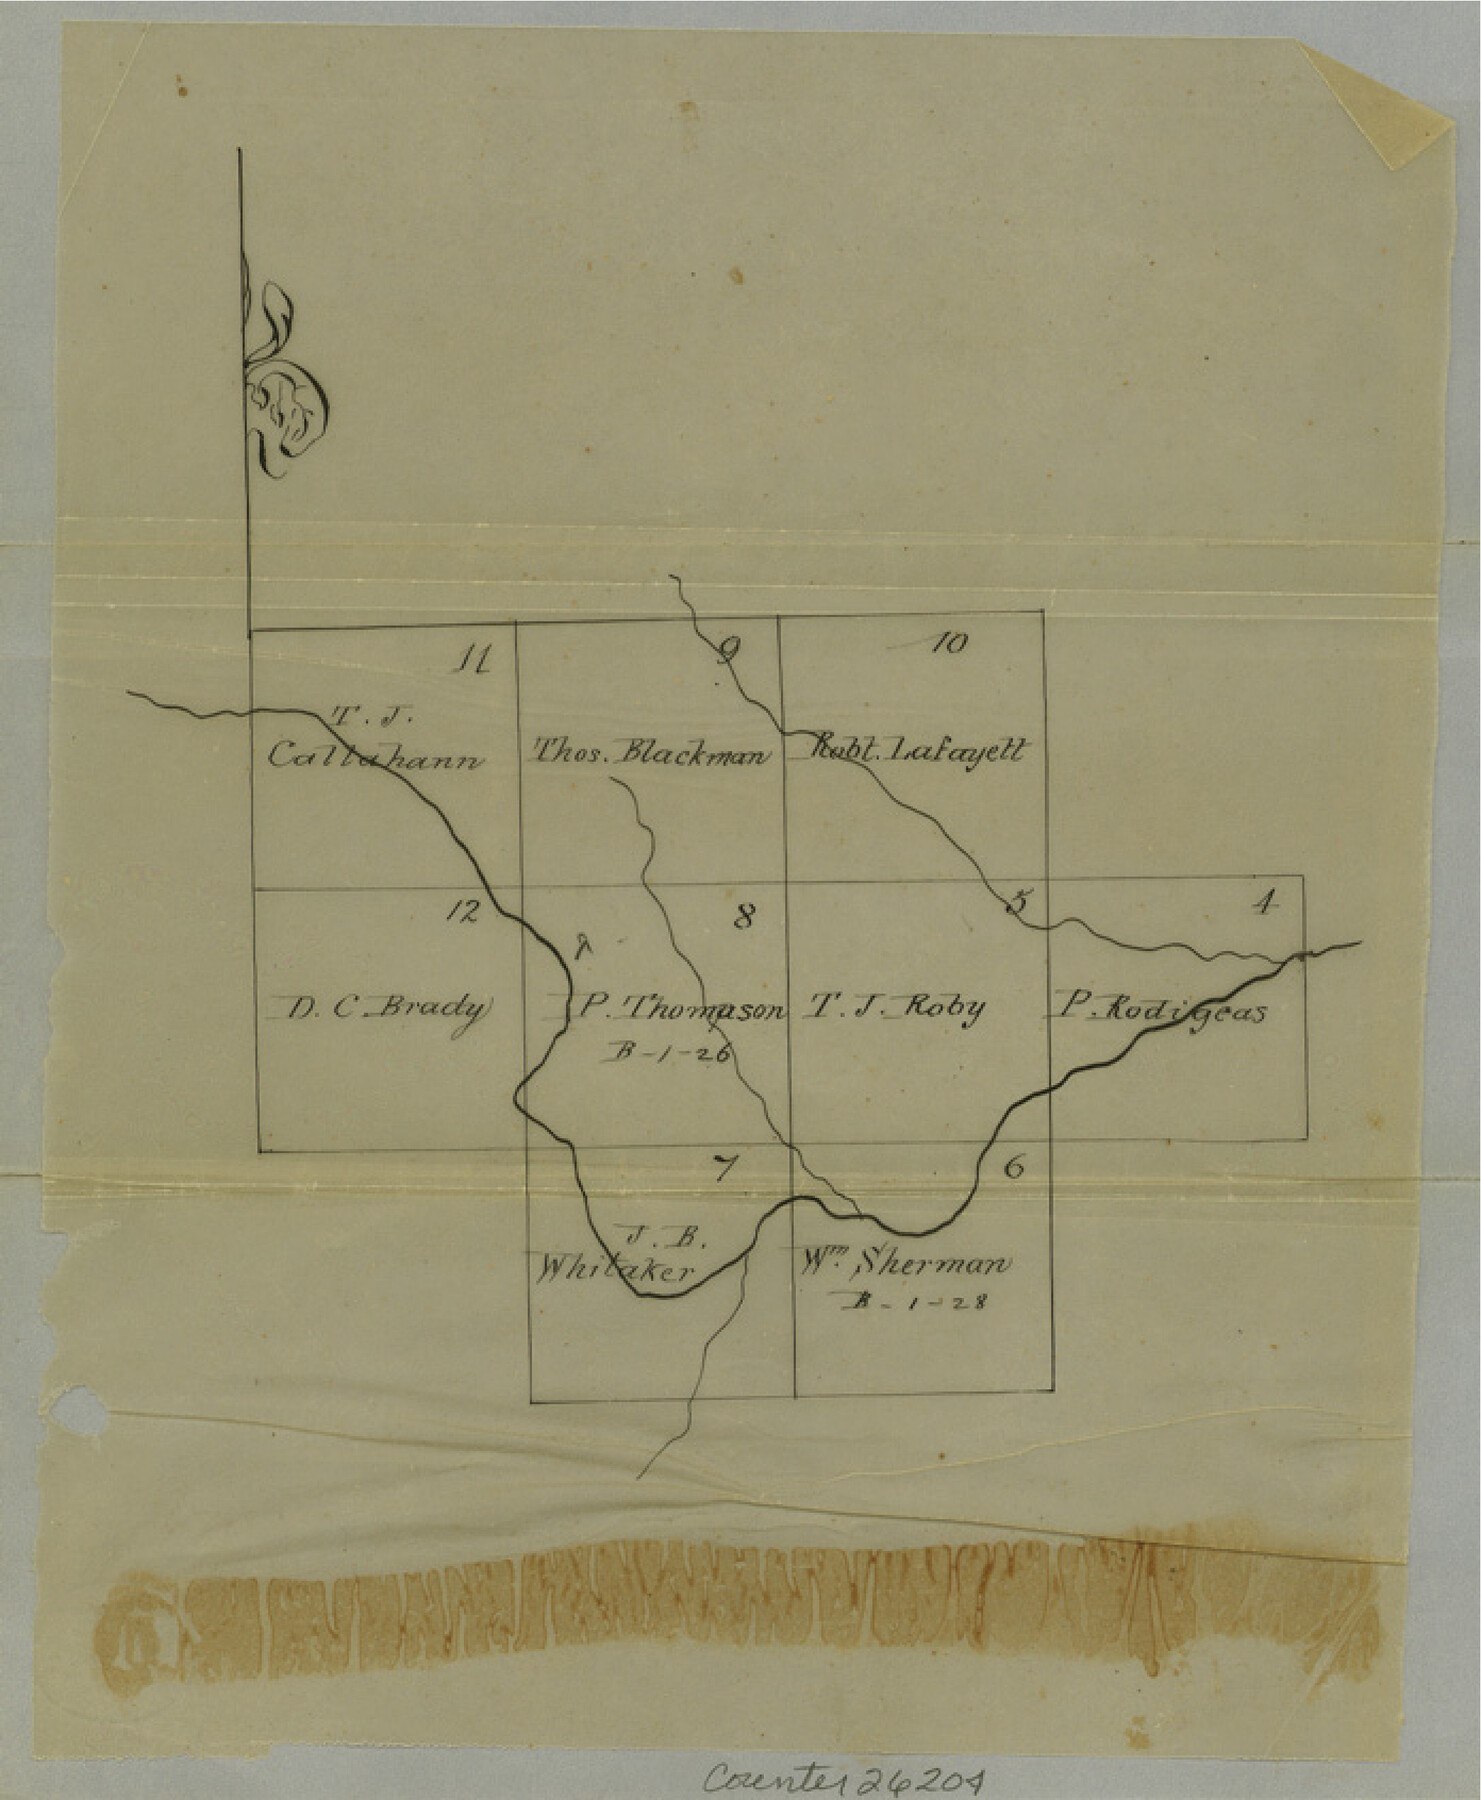 26204, Hays County Sketch File 4, General Map Collection